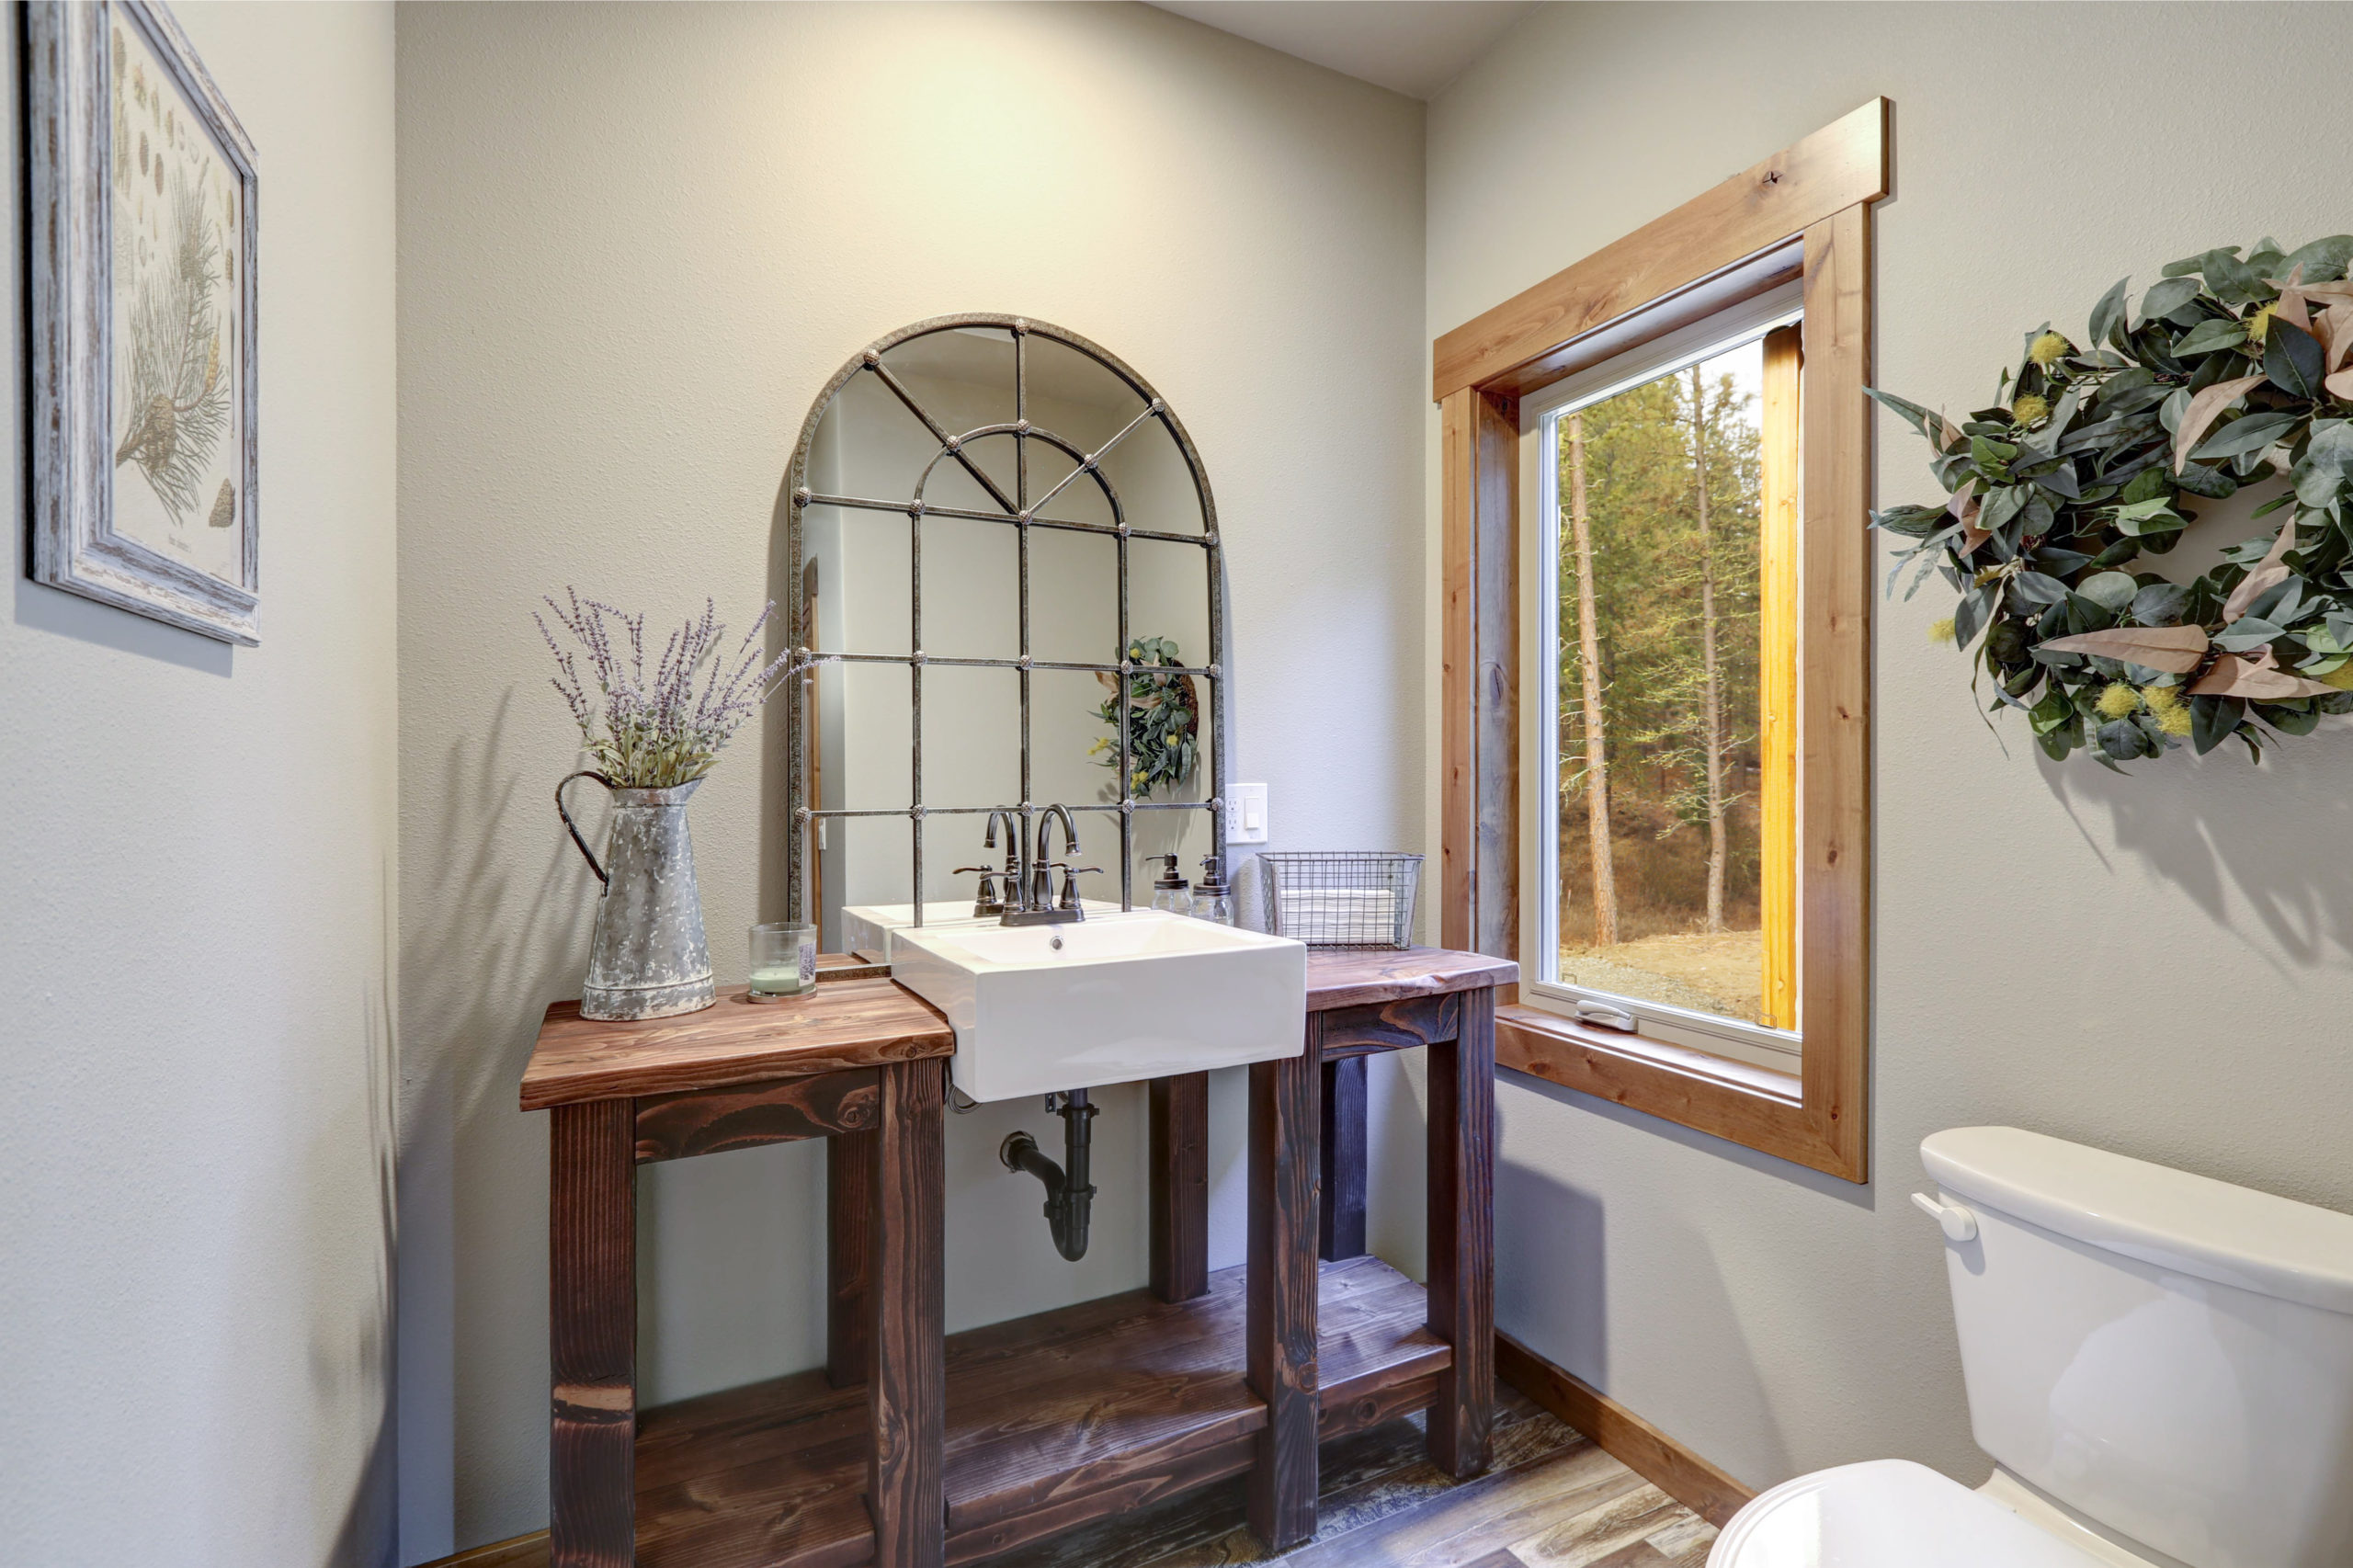 Fantastic bathroom boasts a country style washstand adorned with iron cage mirror